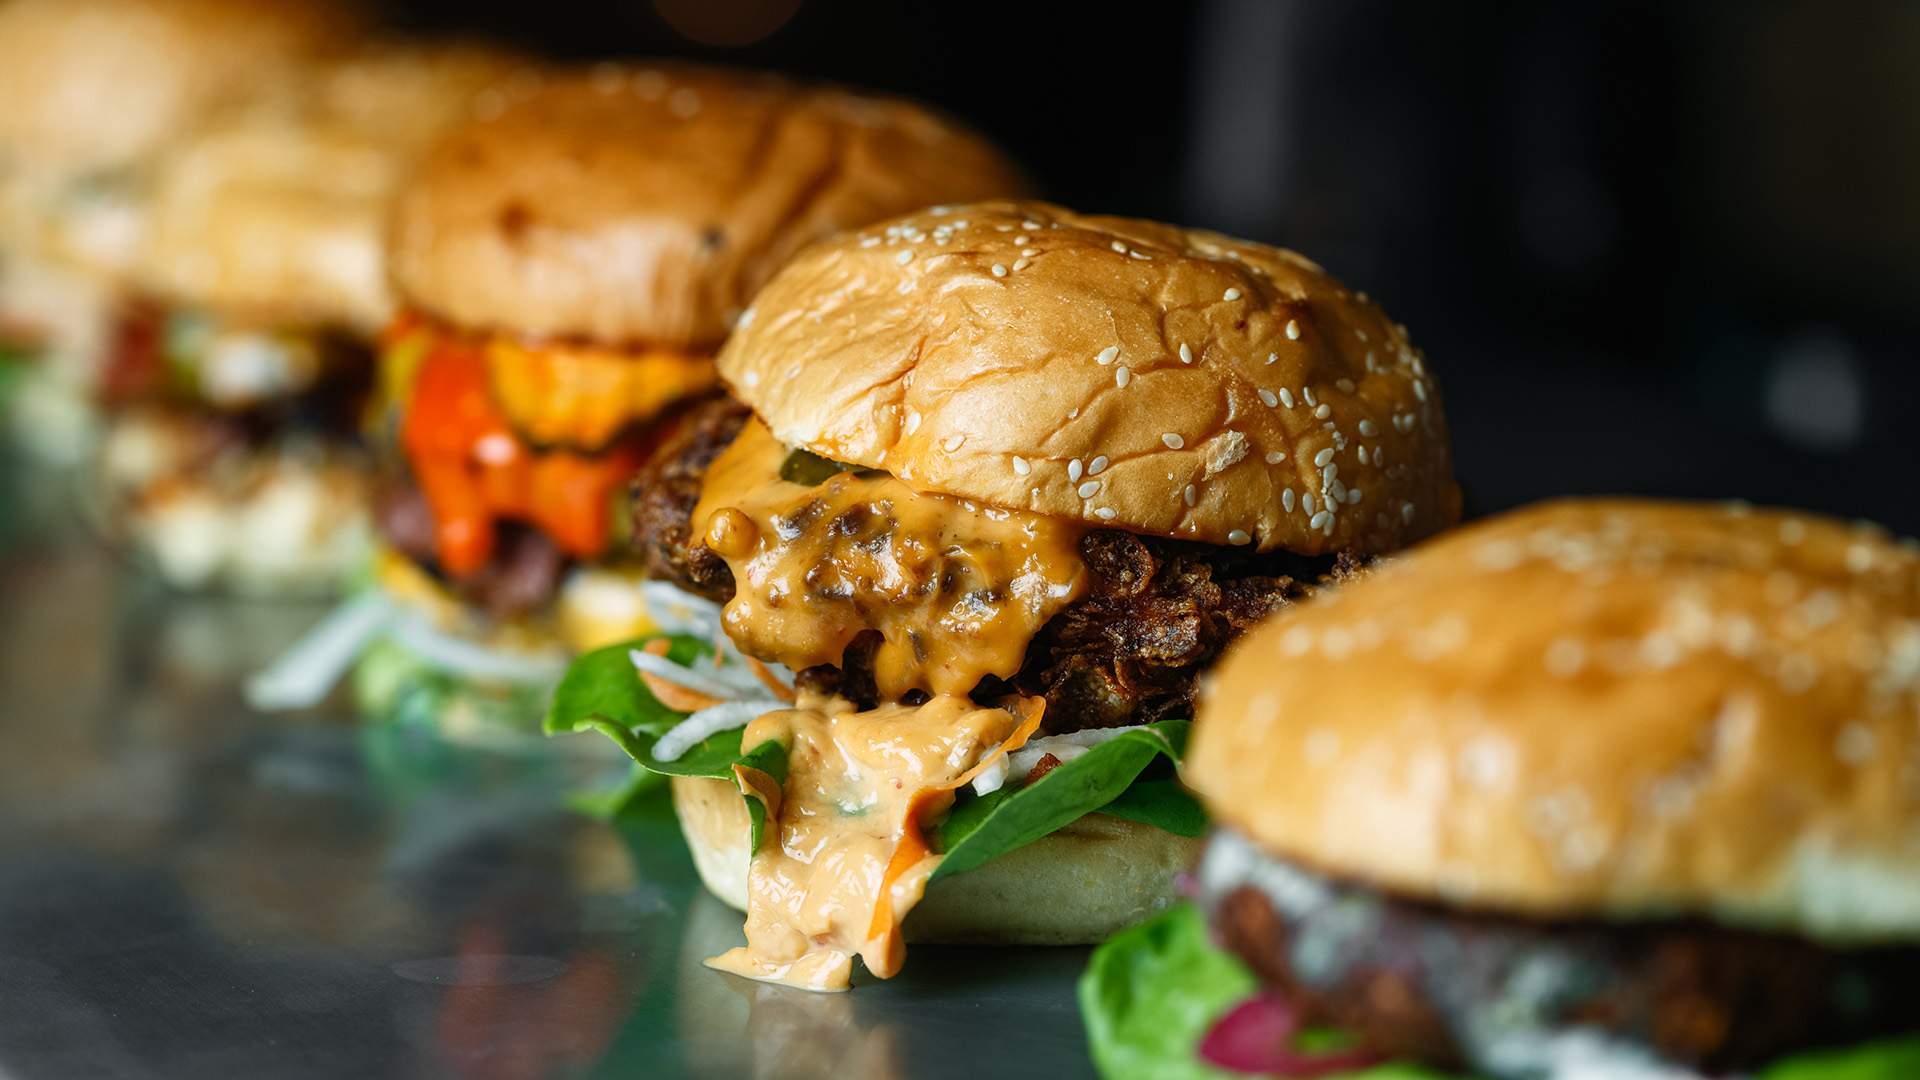 4 Pines Brewing Has Opened a Small Beer and Burger Joint in Surry Hills